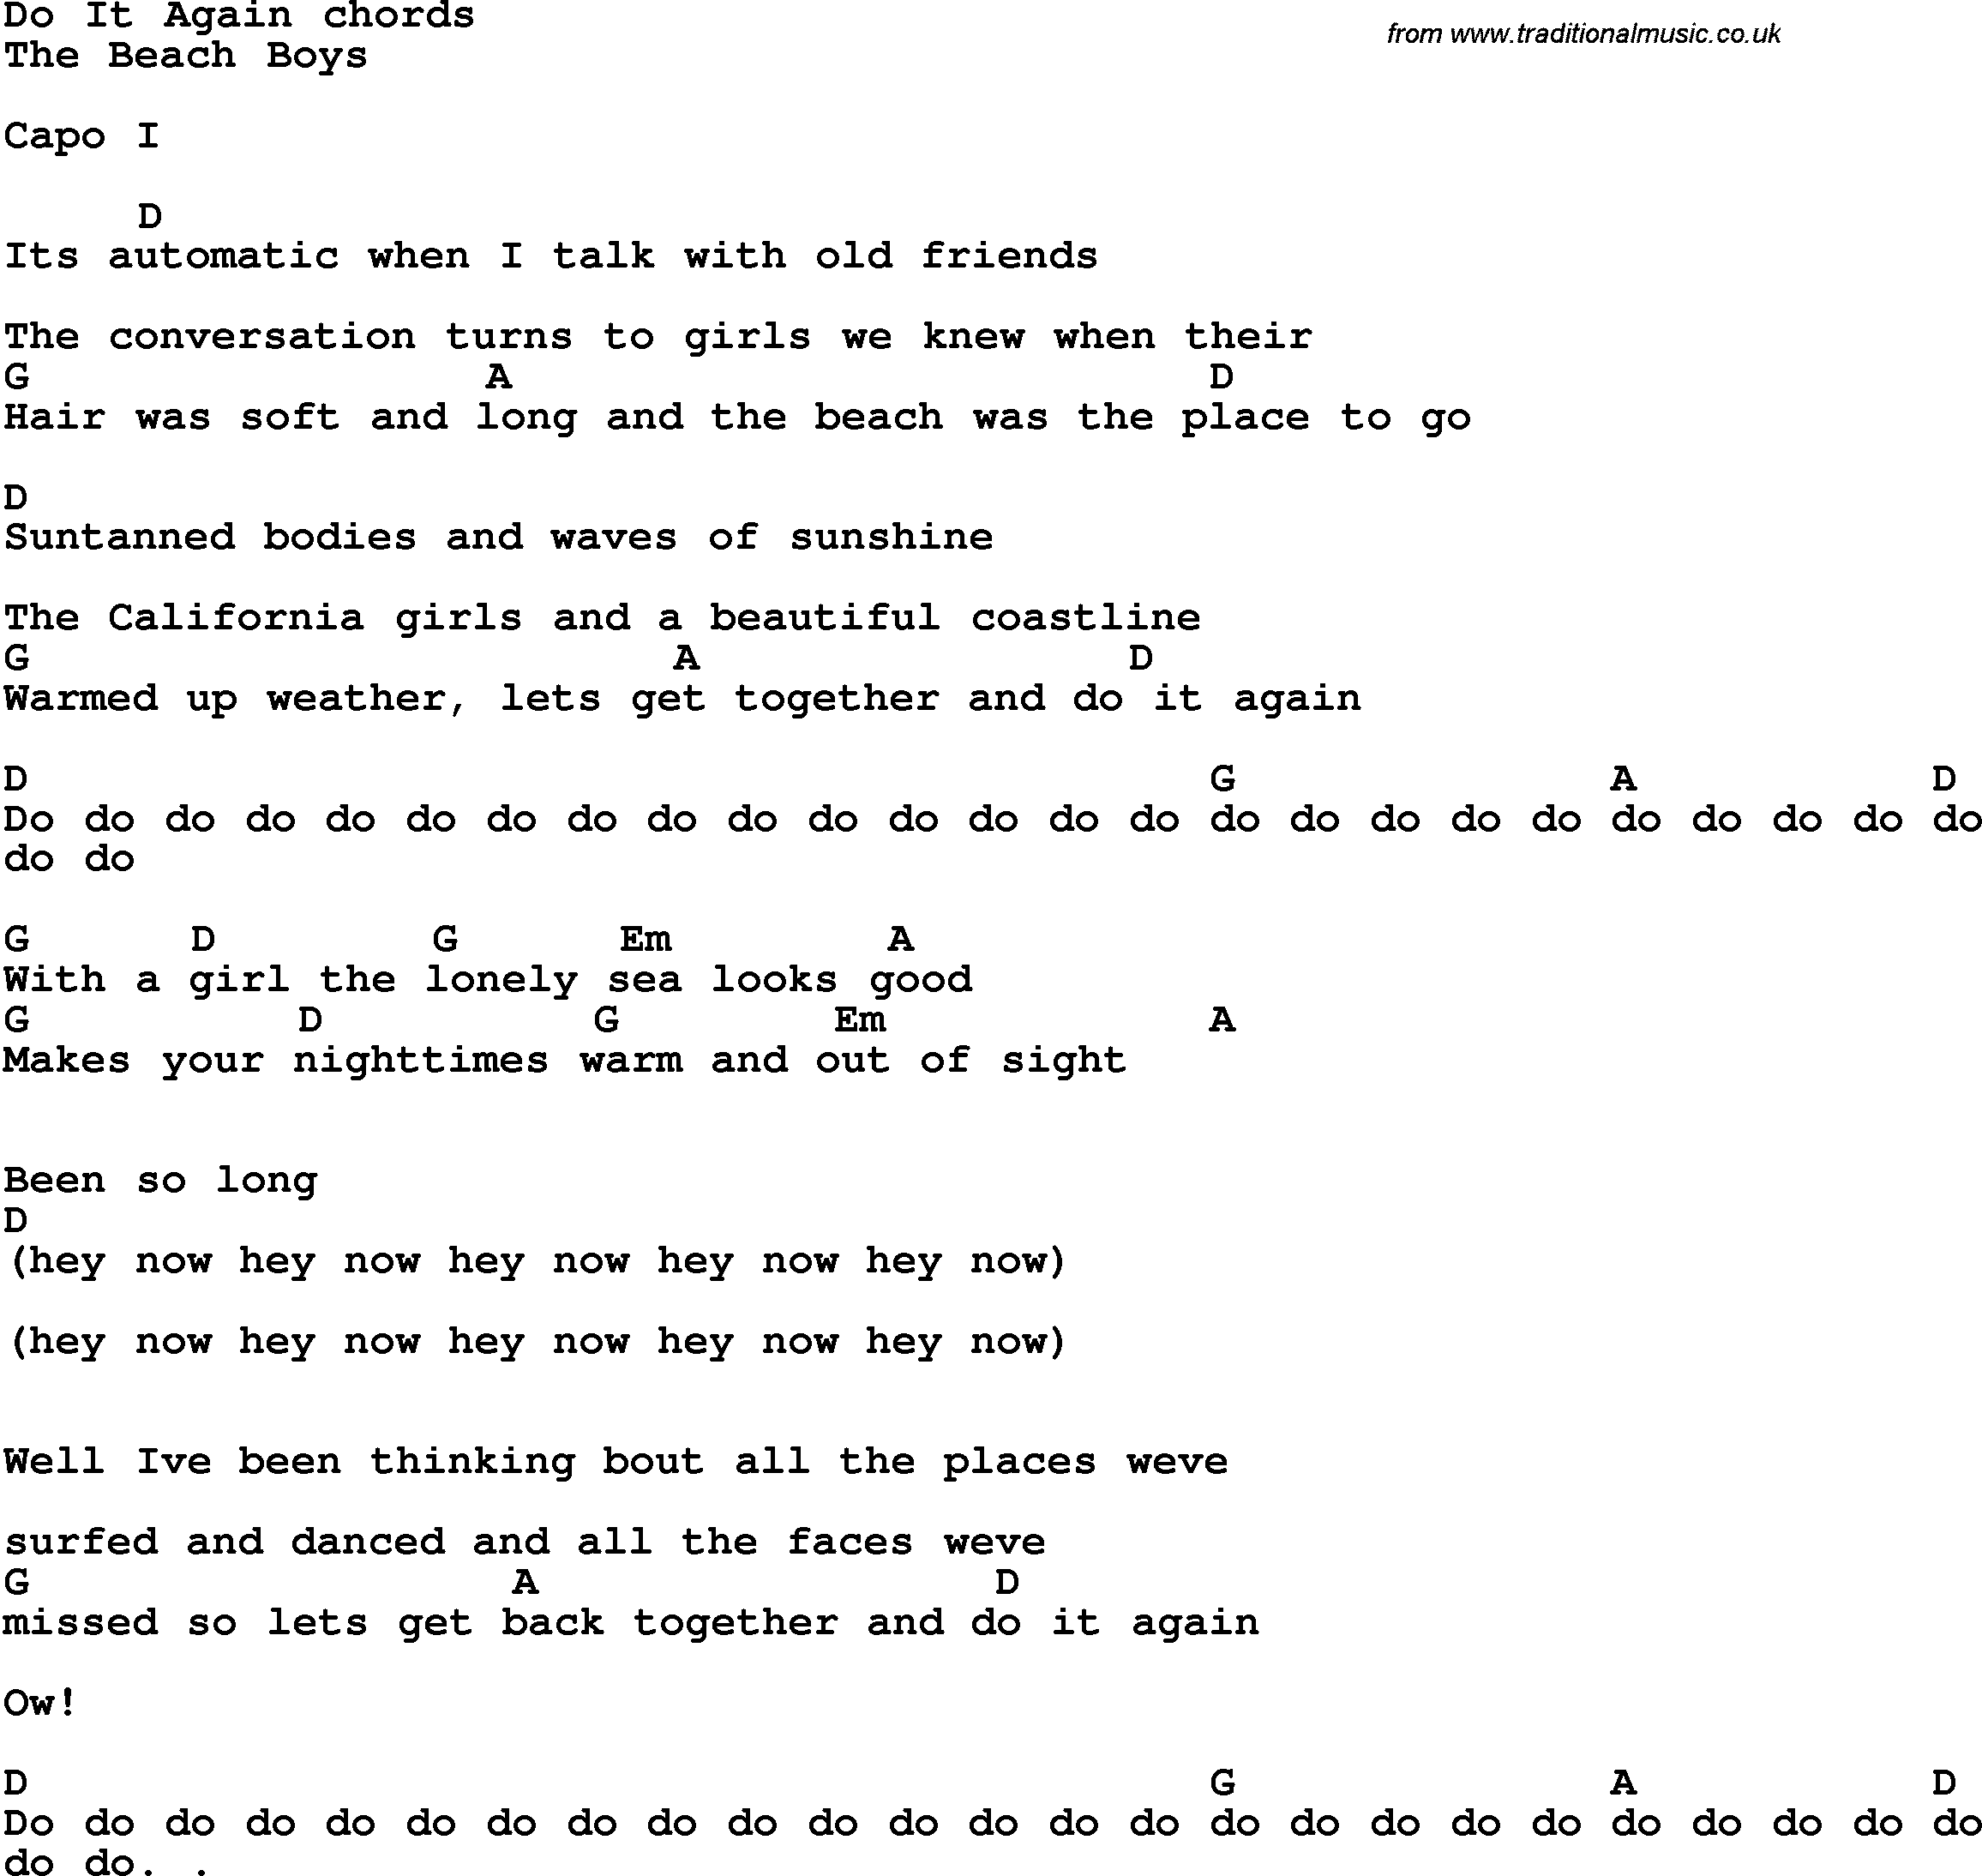 Song lyrics with guitar chords for Do It Again.